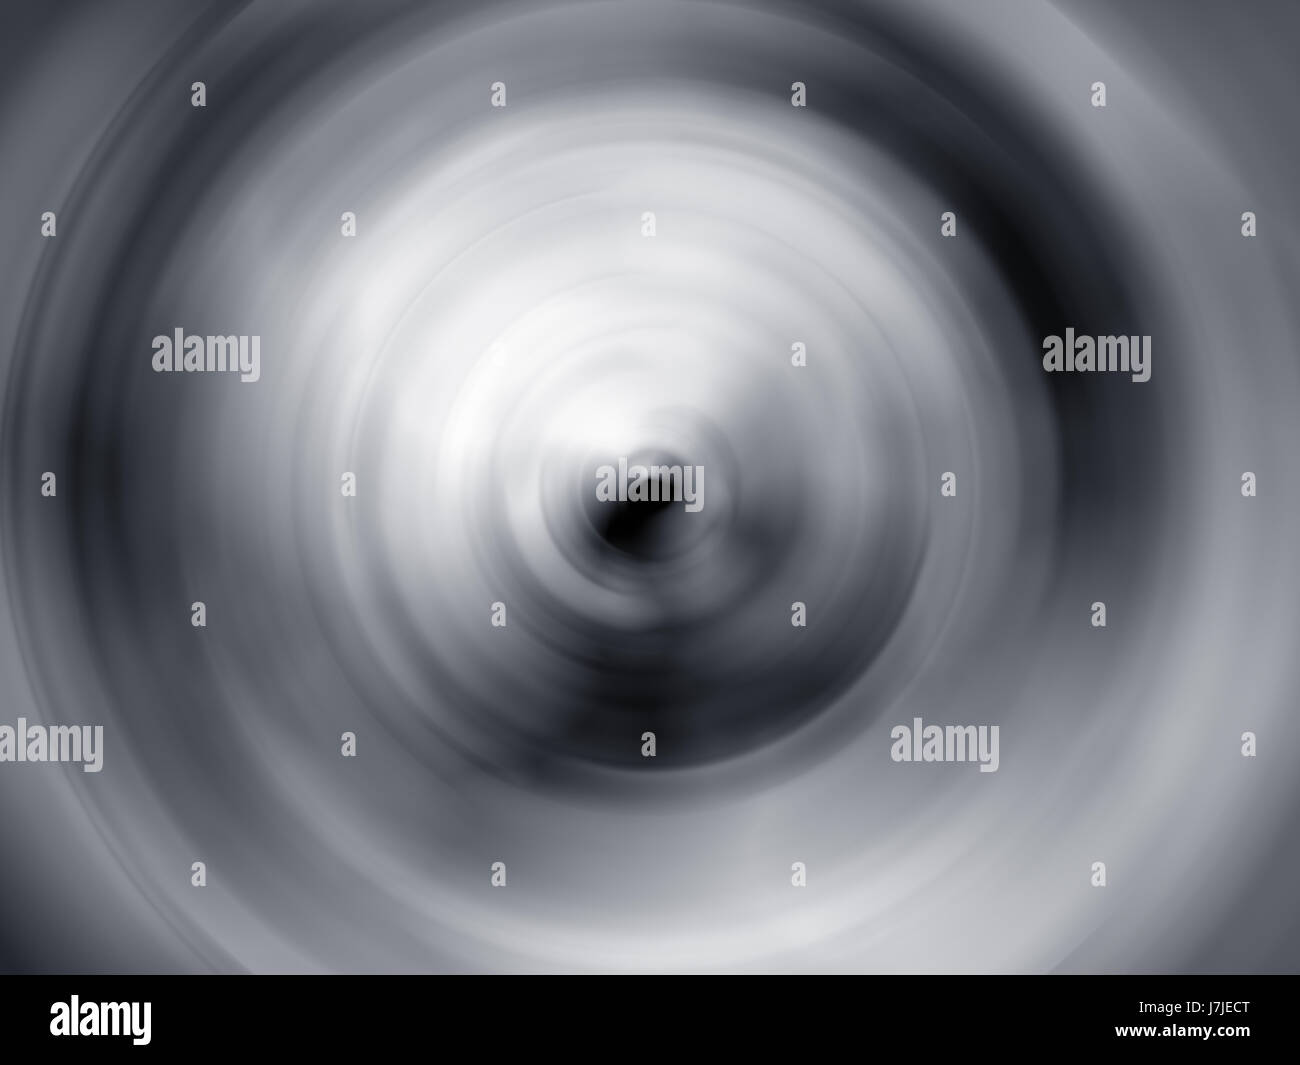 Abstract vortex background in black and white Stock Photo